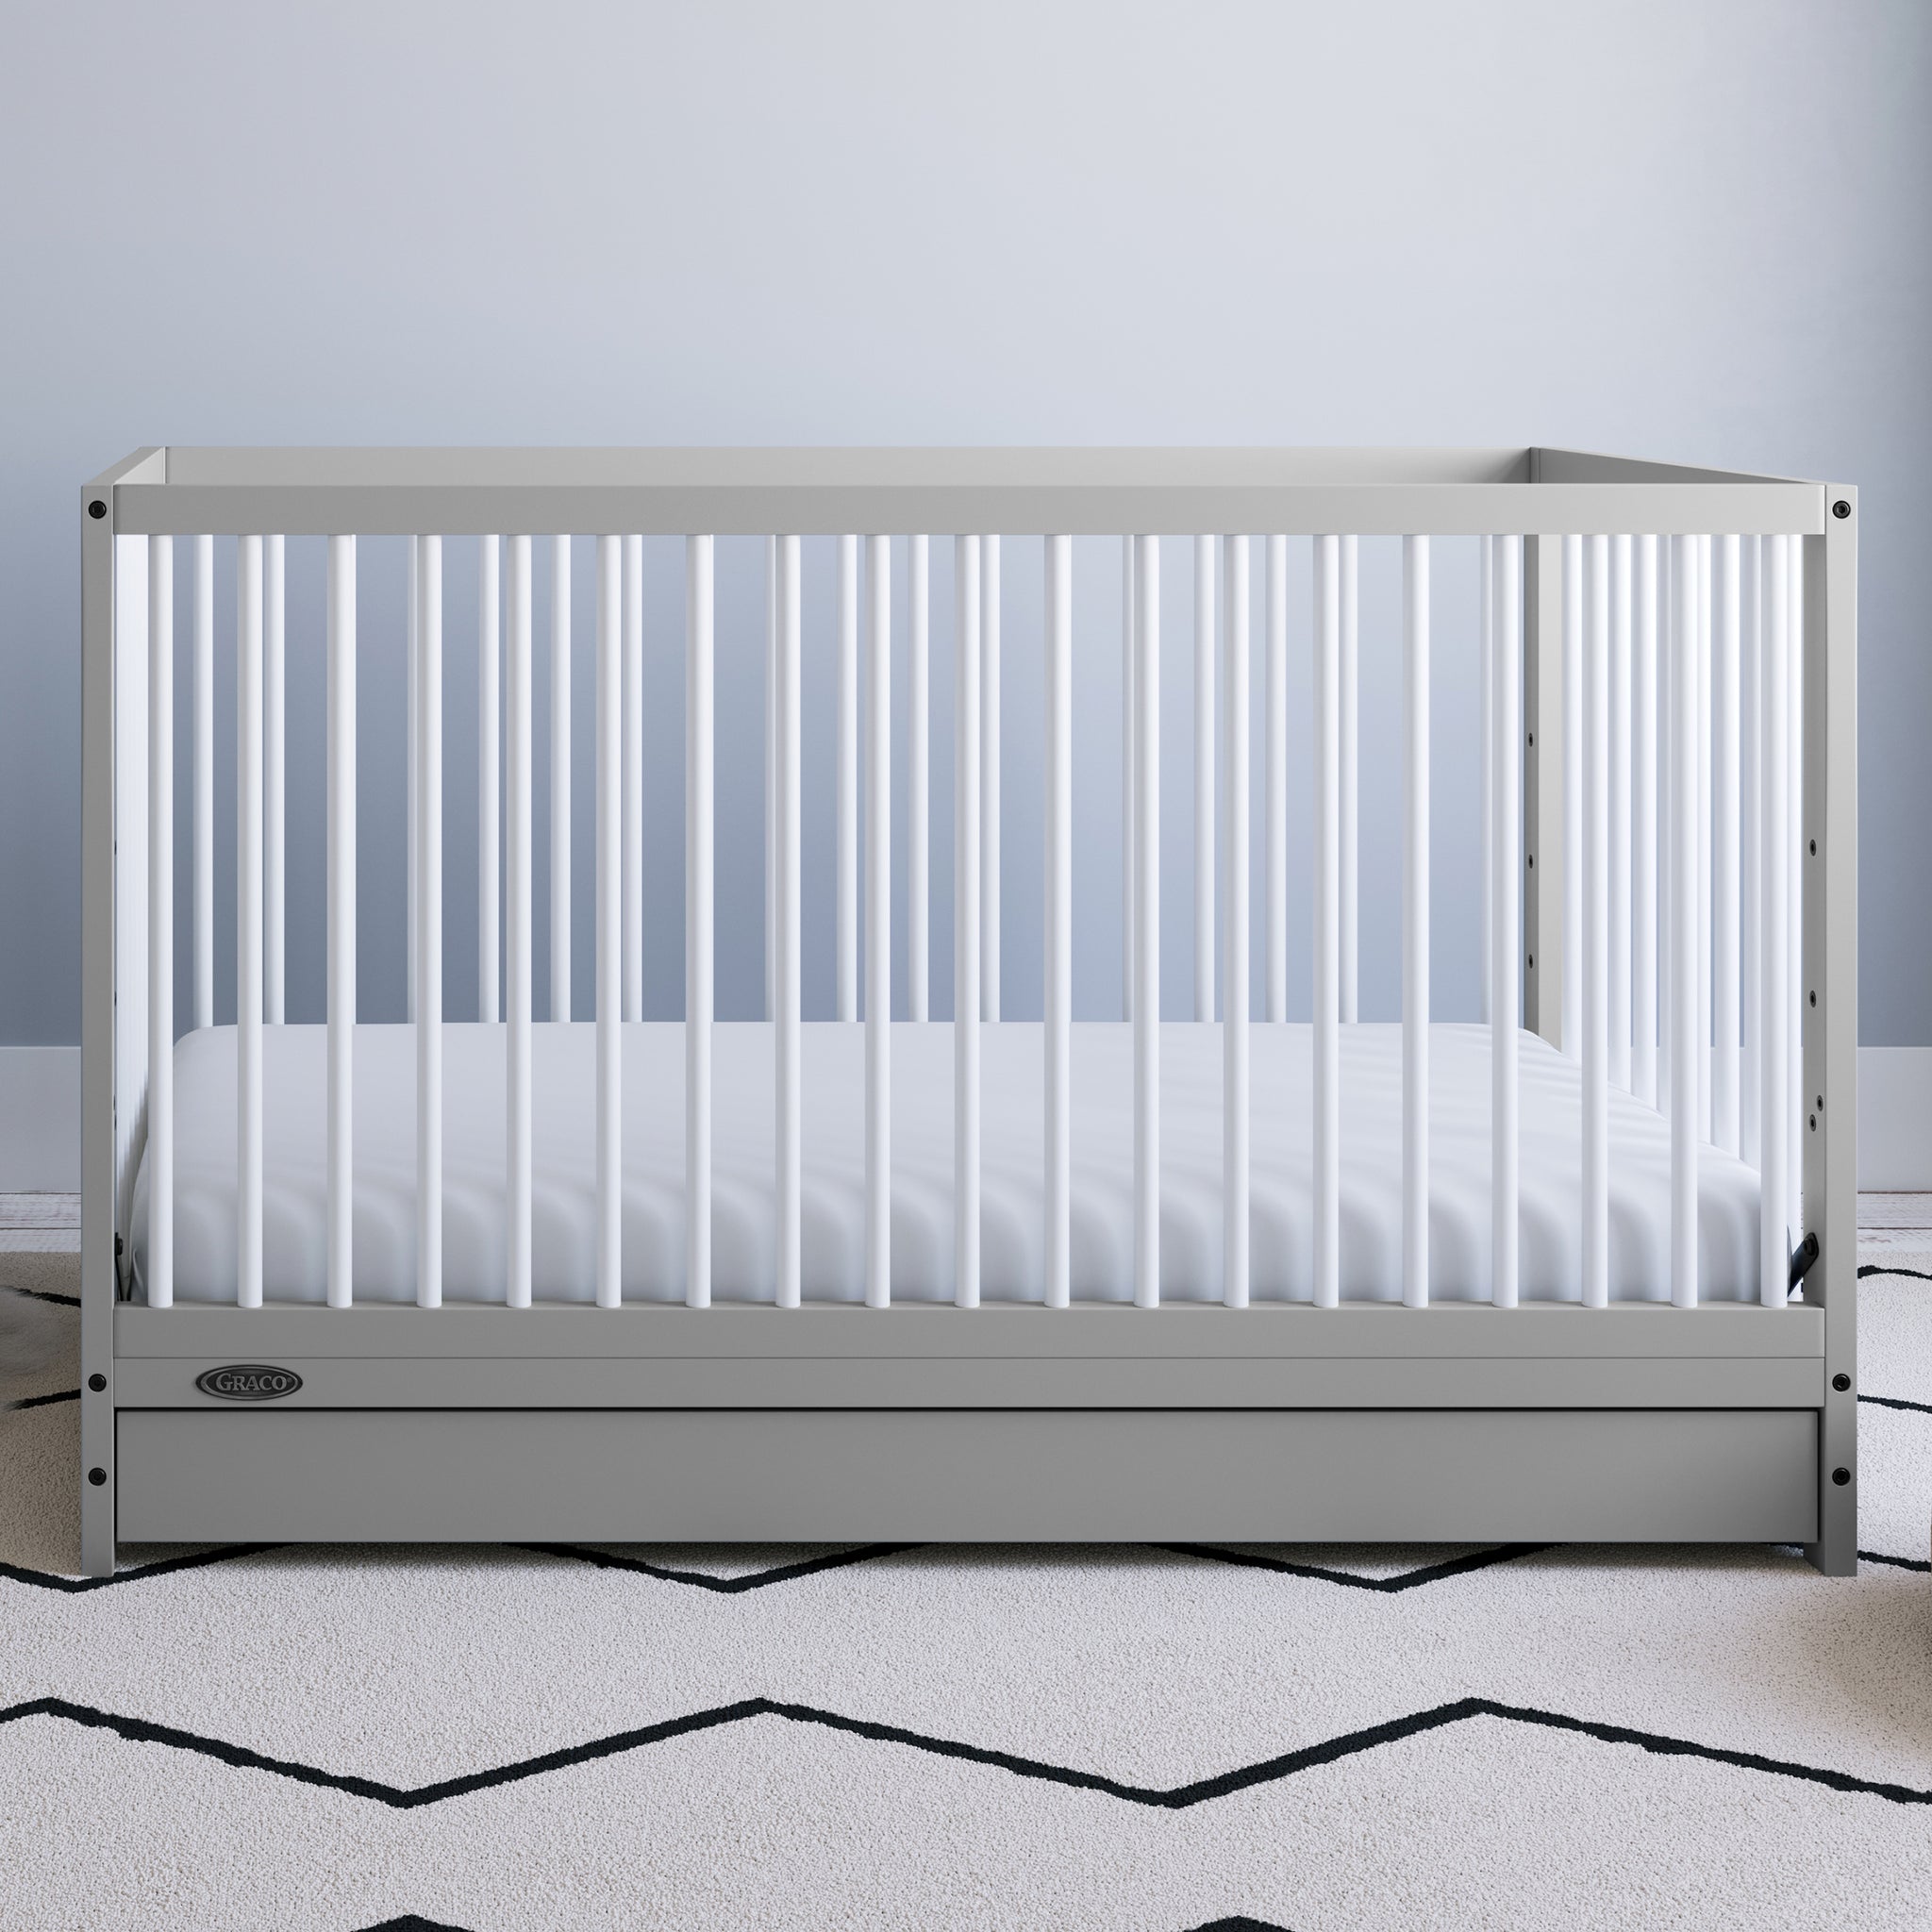 Pebble gray with white crib with drawer in nursery